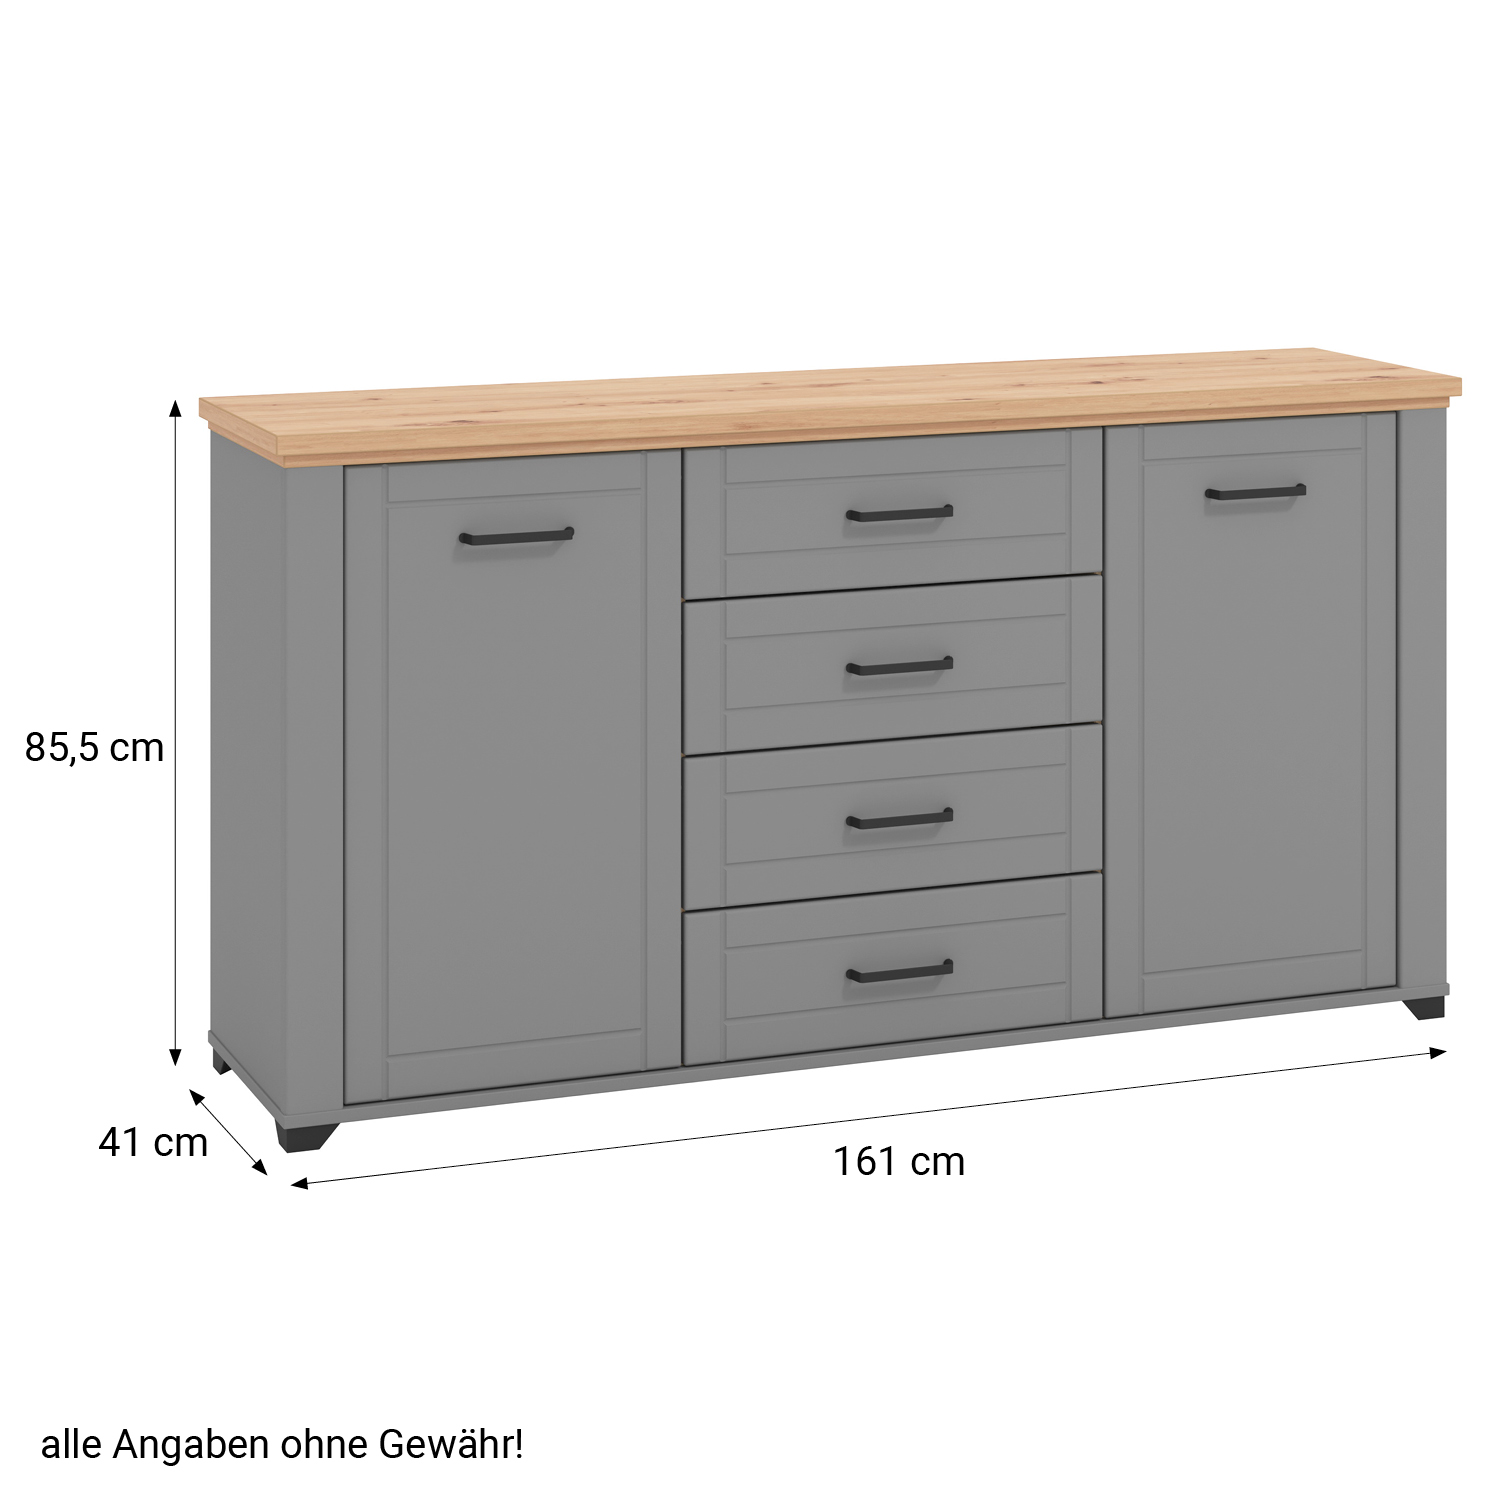 Chest of Drawers Sideboard Oak Matt Grey Wood Solid Cupboard with 4 Drawers